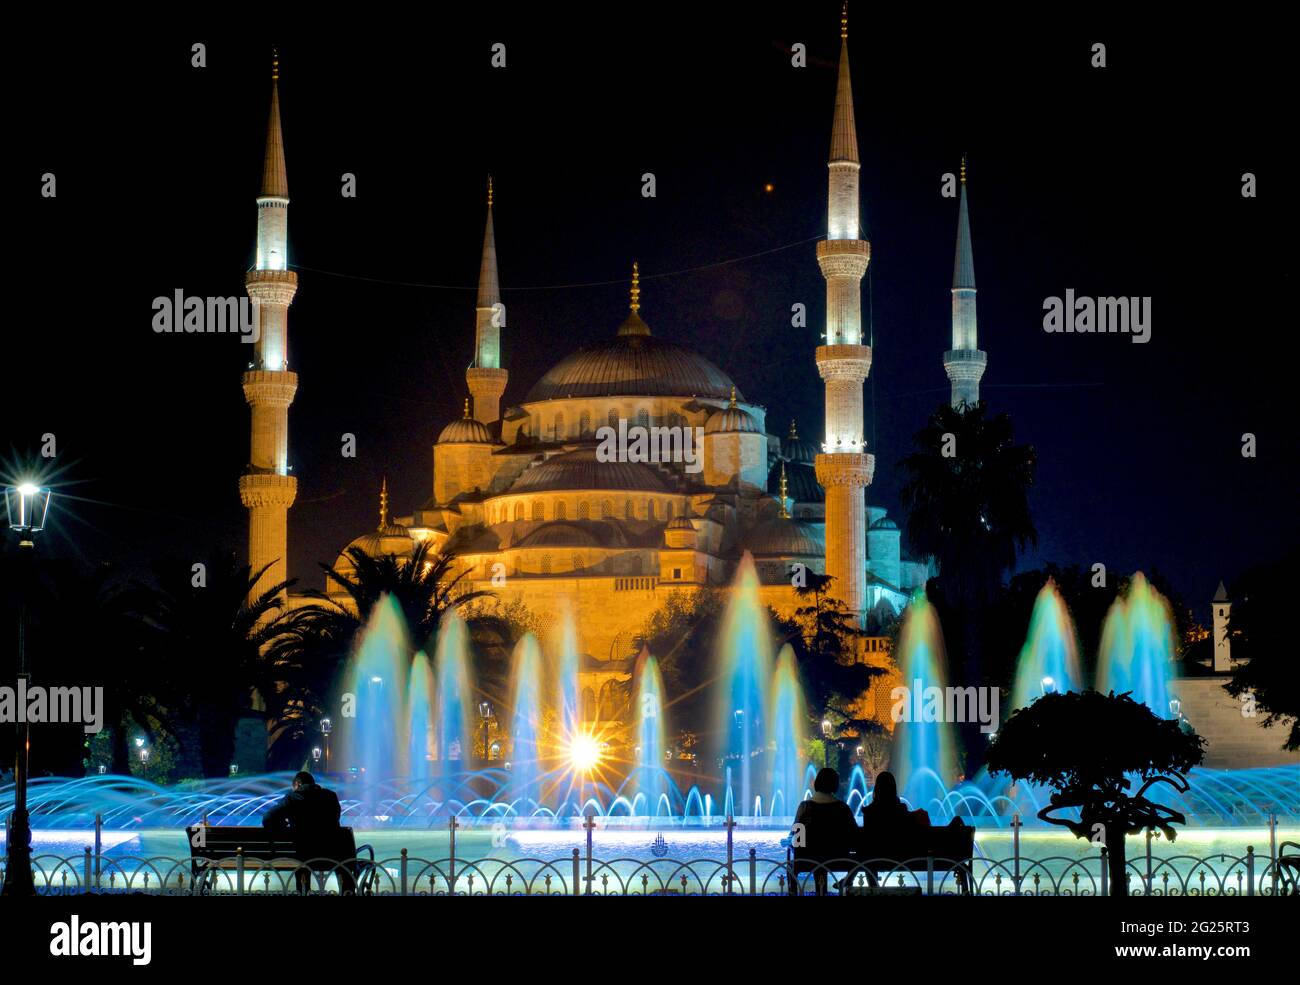 Sultan Ahmed Mosque (Turkish: Sultan Ahmet Camii), also known as the Blue Mosque. An Ottoman-era Friday mosque located in Istanbul, Turkey. Illuminated at night; colourfully-lit Sultan Ahmad Maydan water fountain Stock Photo